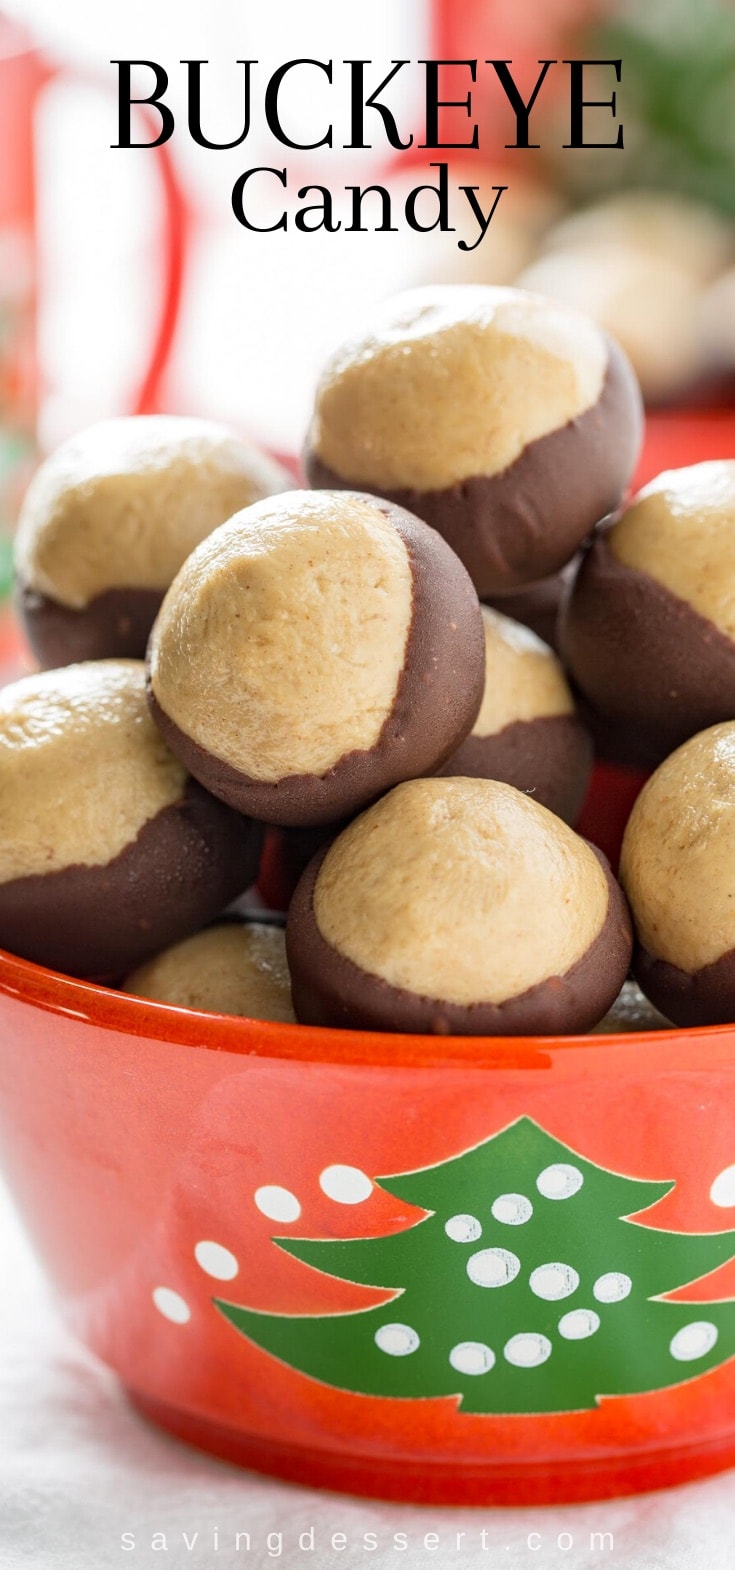 A festive bowl of chocolate dipped peanut butter Buckeye Candy